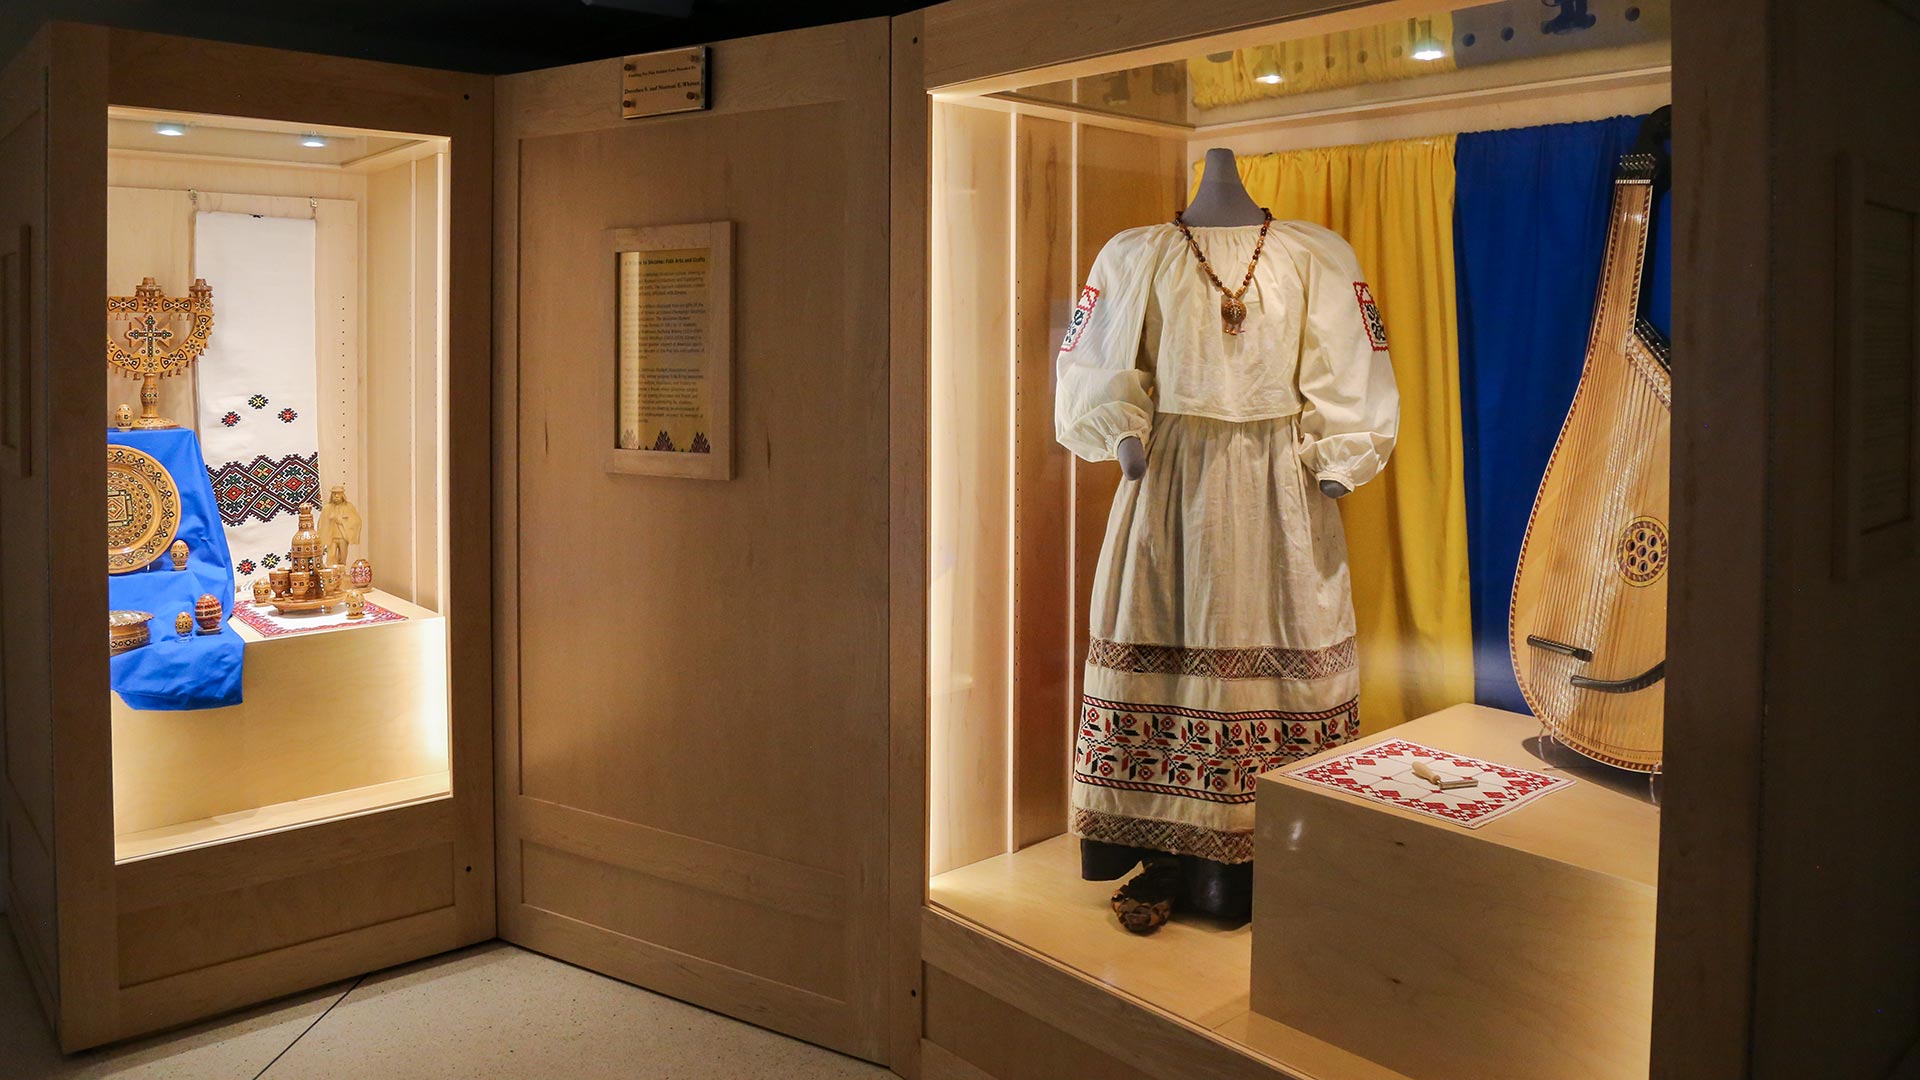 overview of exhibit with a case of woooden eggs and other objects on left and a dress on right